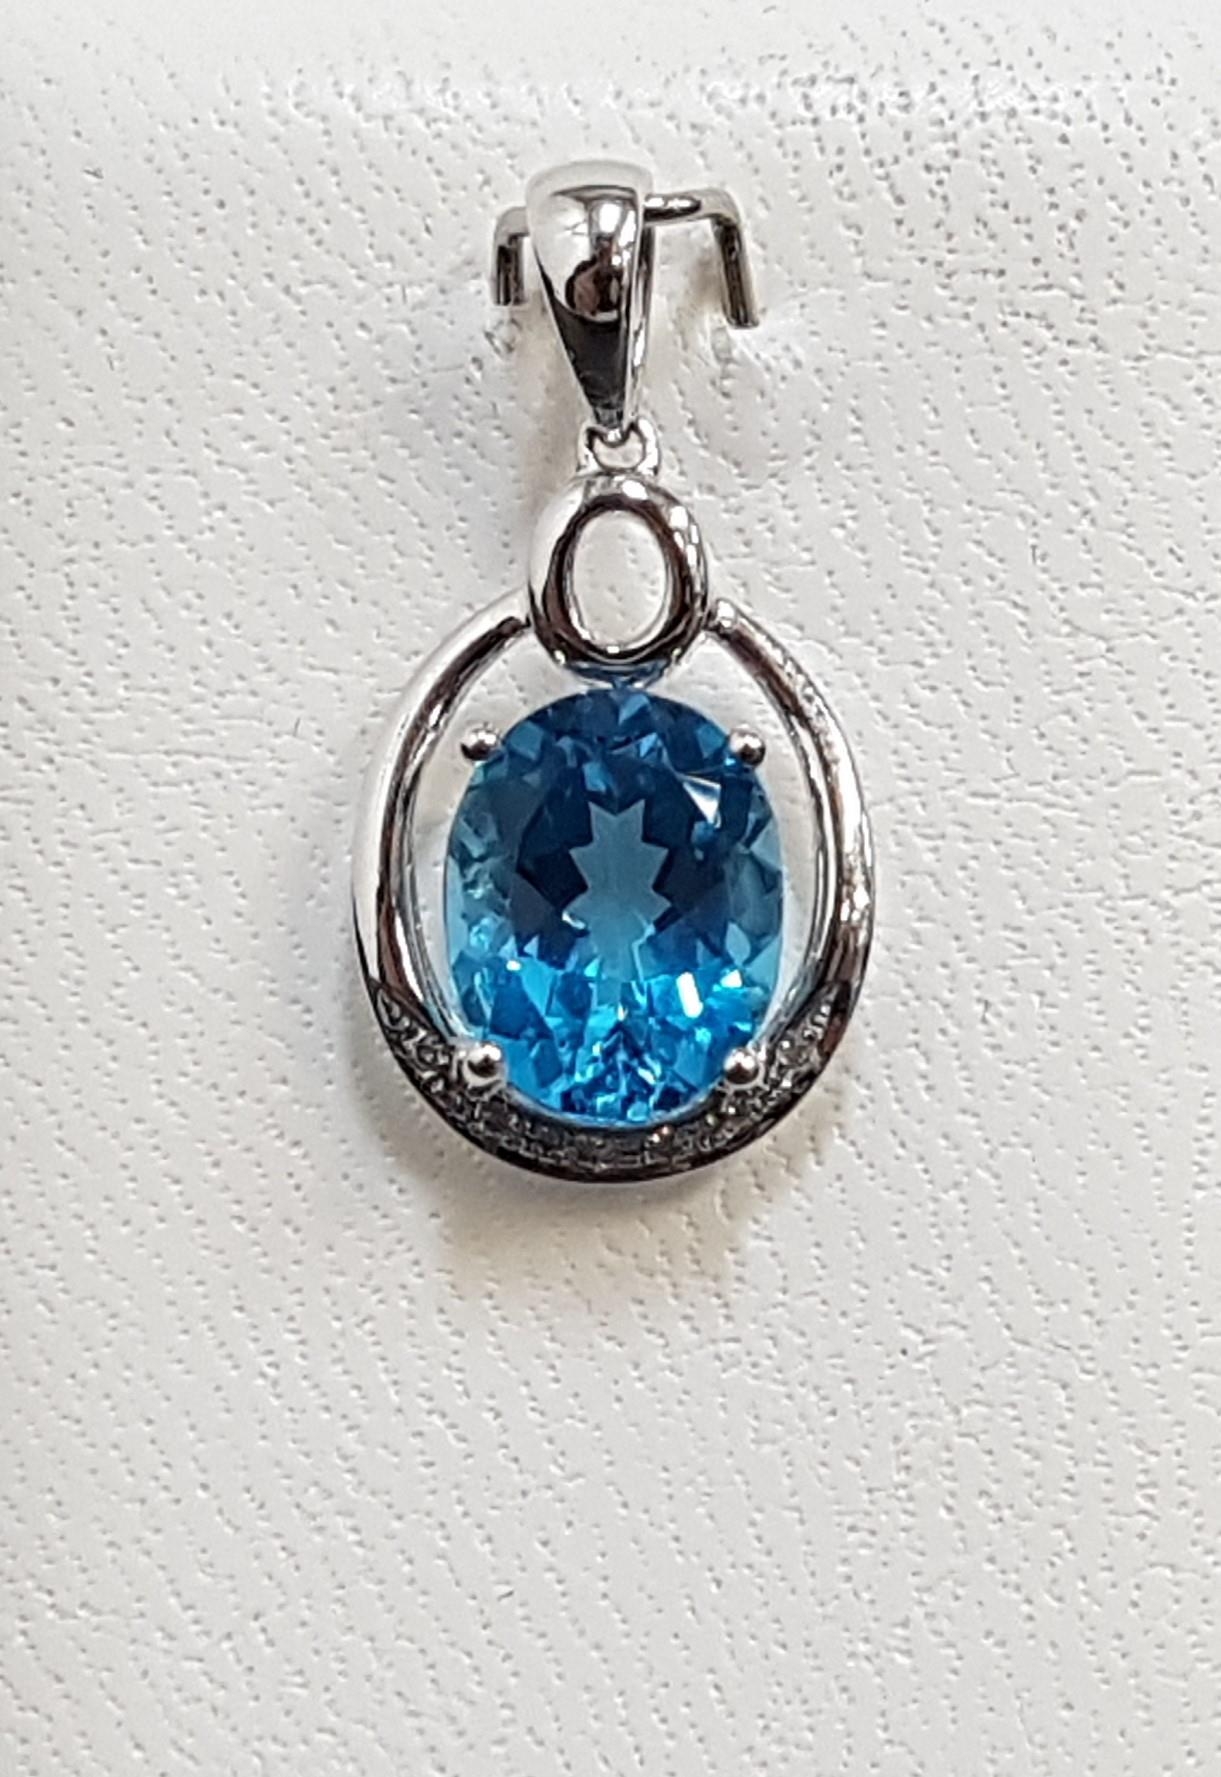 BLUE TOPAZ AND DIAMOND PENDANT the central oval cut blue topaz approximately 2.5cts with illusion